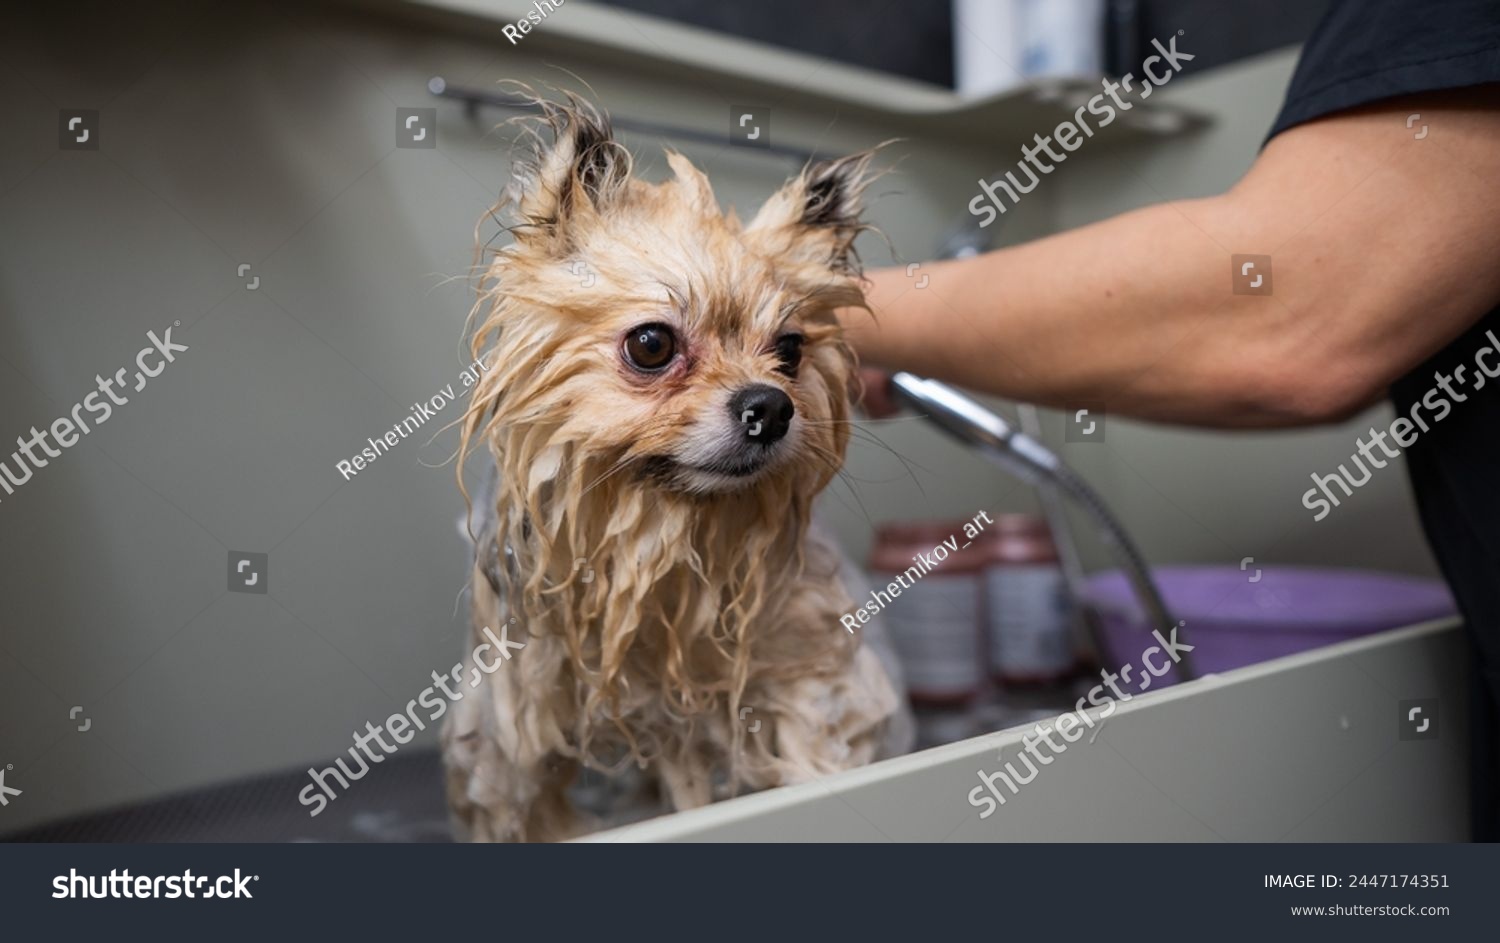 A woman showers a cute Pomeranian dog in a grooming salon. #2447174351